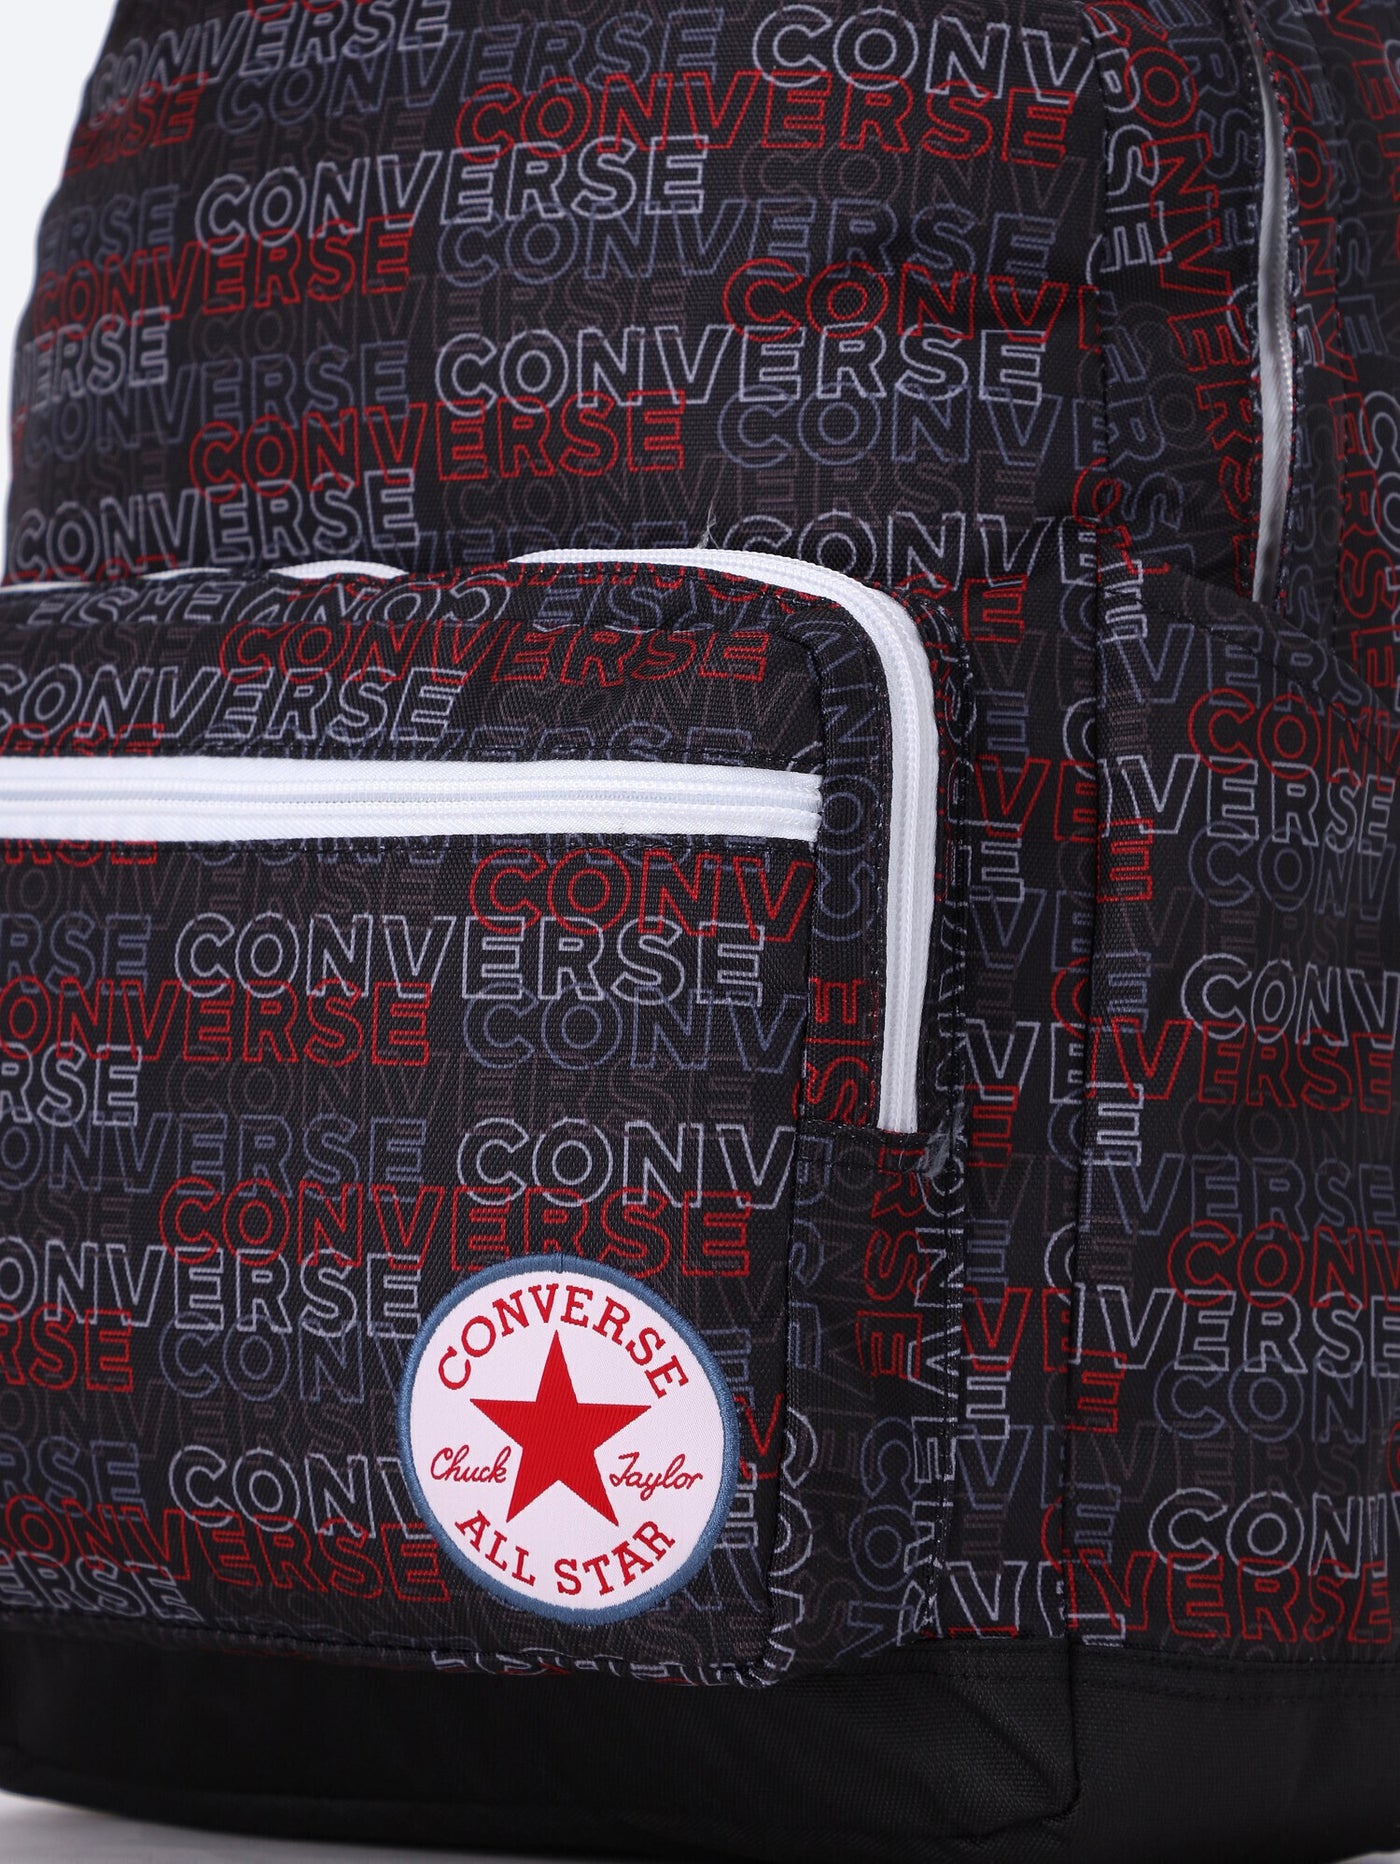 Converse Unisex Go 2 Backpack - 10021023-A03